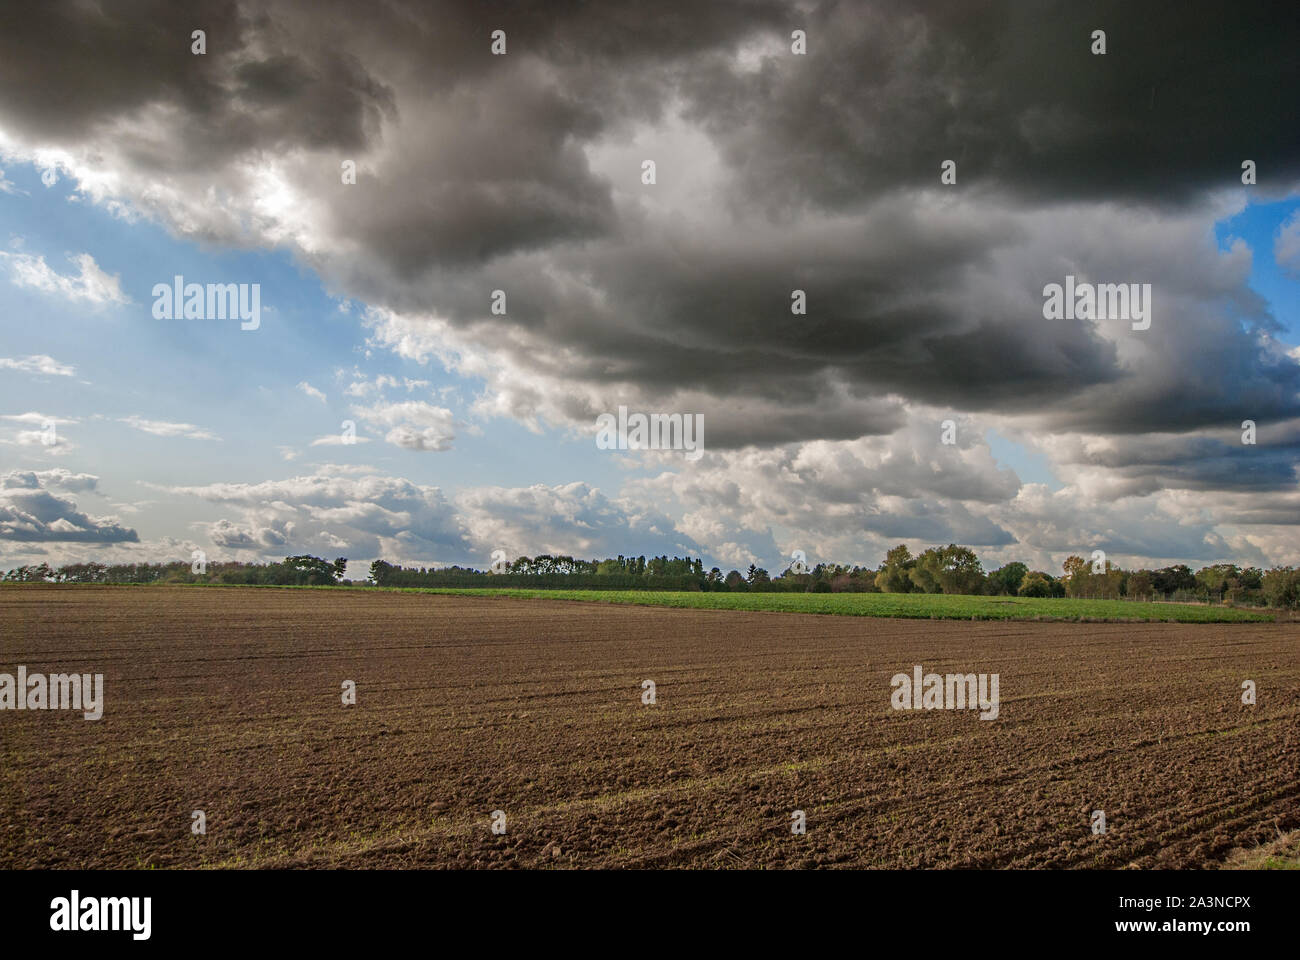 Dramatic rain clouds over a harvested field. Panoramic view. Stock Photo